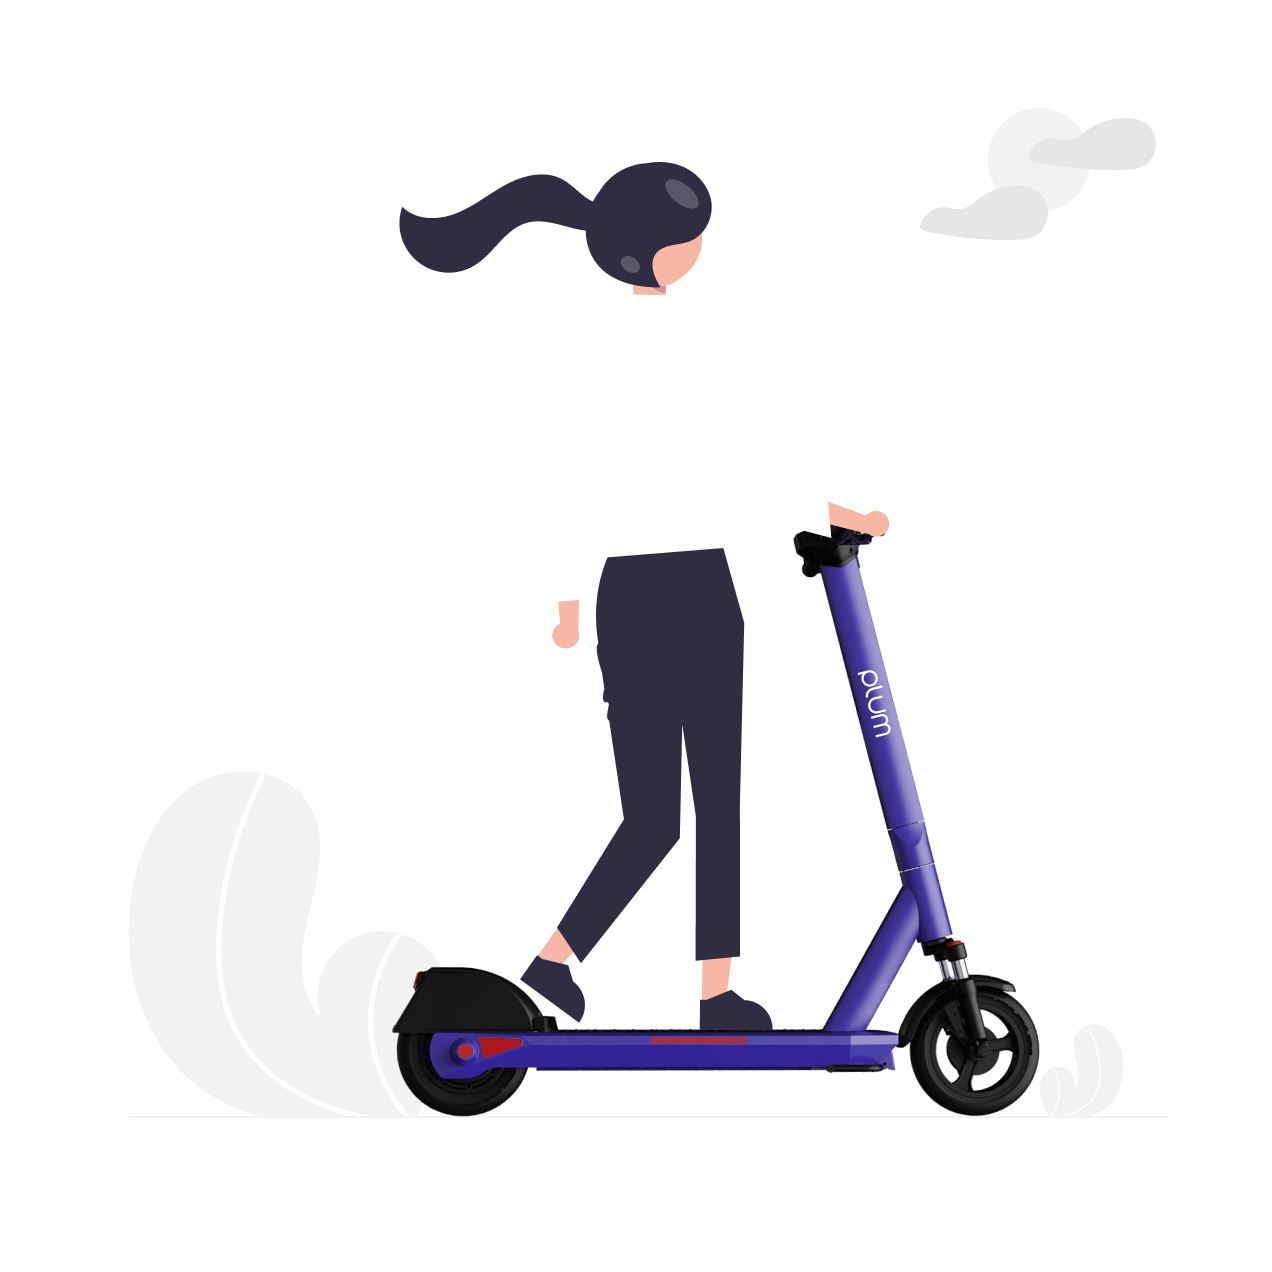 Illustration of a woman wearing a helmet while riding on a Plum e-scooter